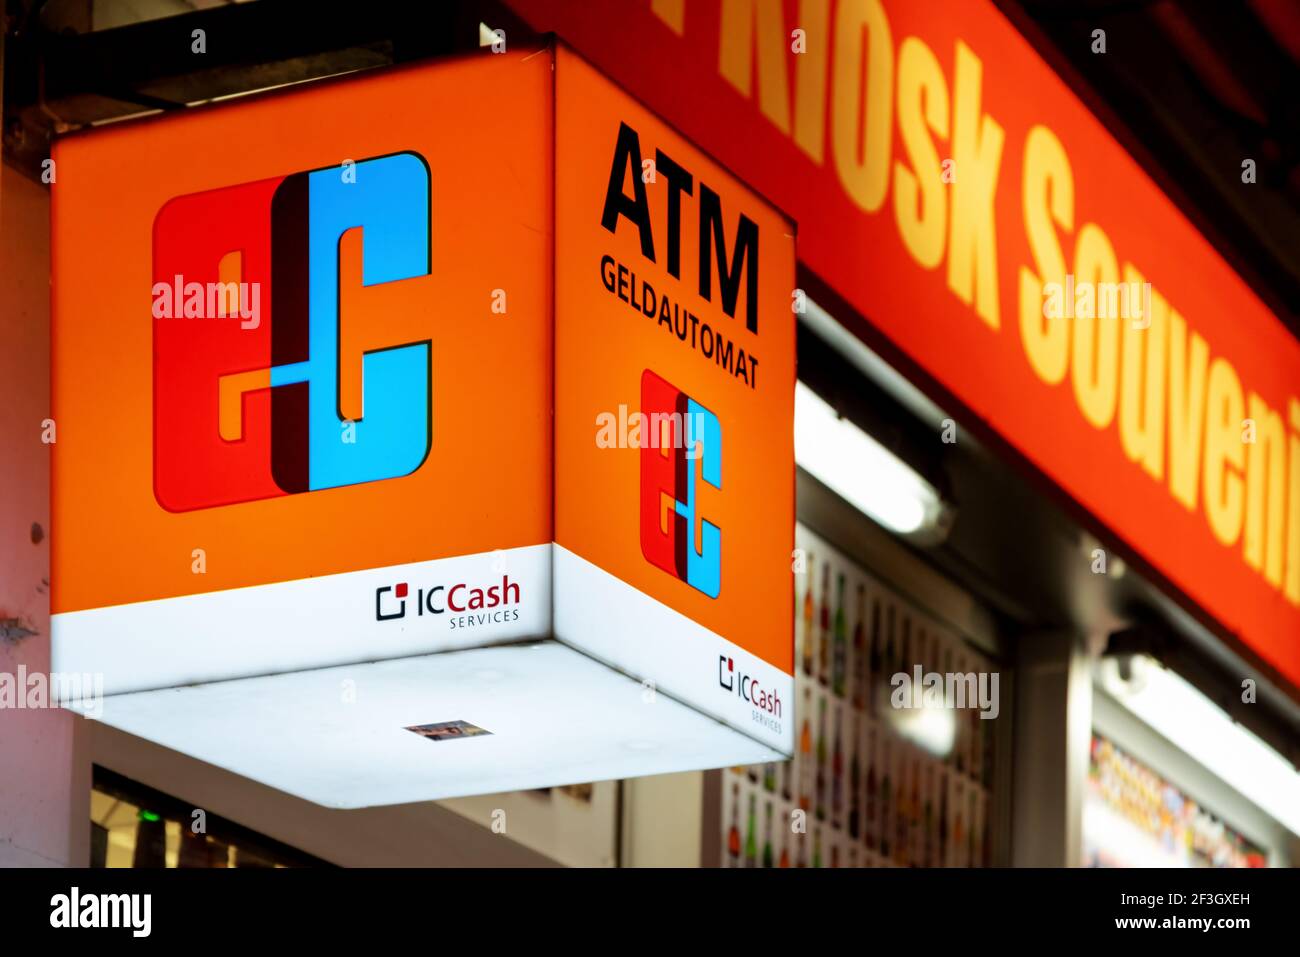 ATM Geldautomat. Branch logo of Euro Cash . Euro Cash, Girocard is an interbank network and debit card service connecting virtually all German ATMs an Stock Photo